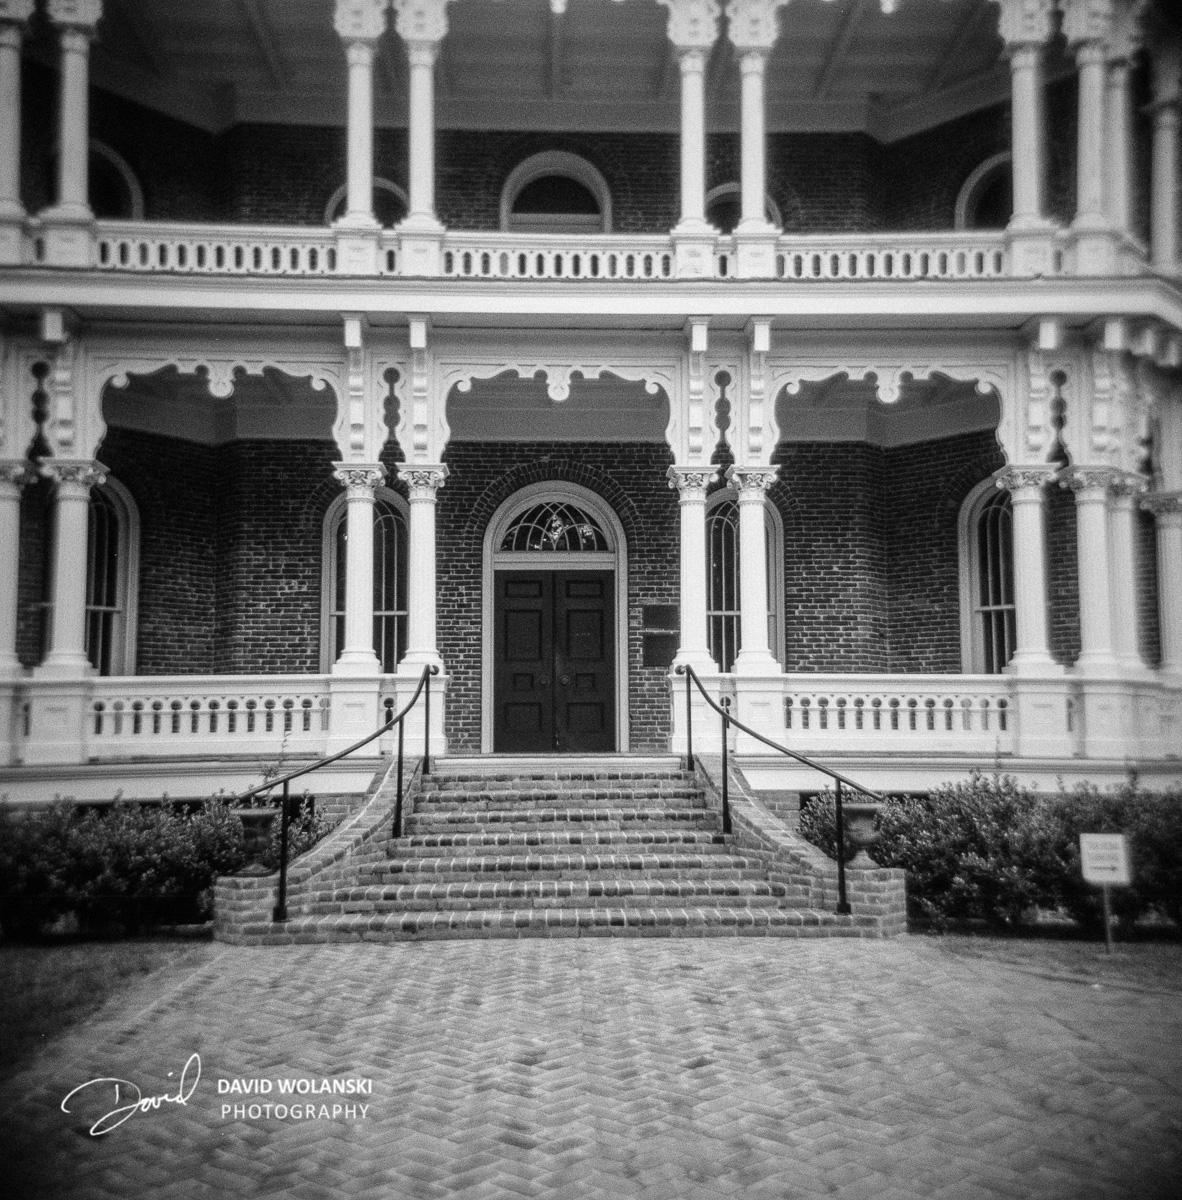 The Longwood Mansion Front Entrance